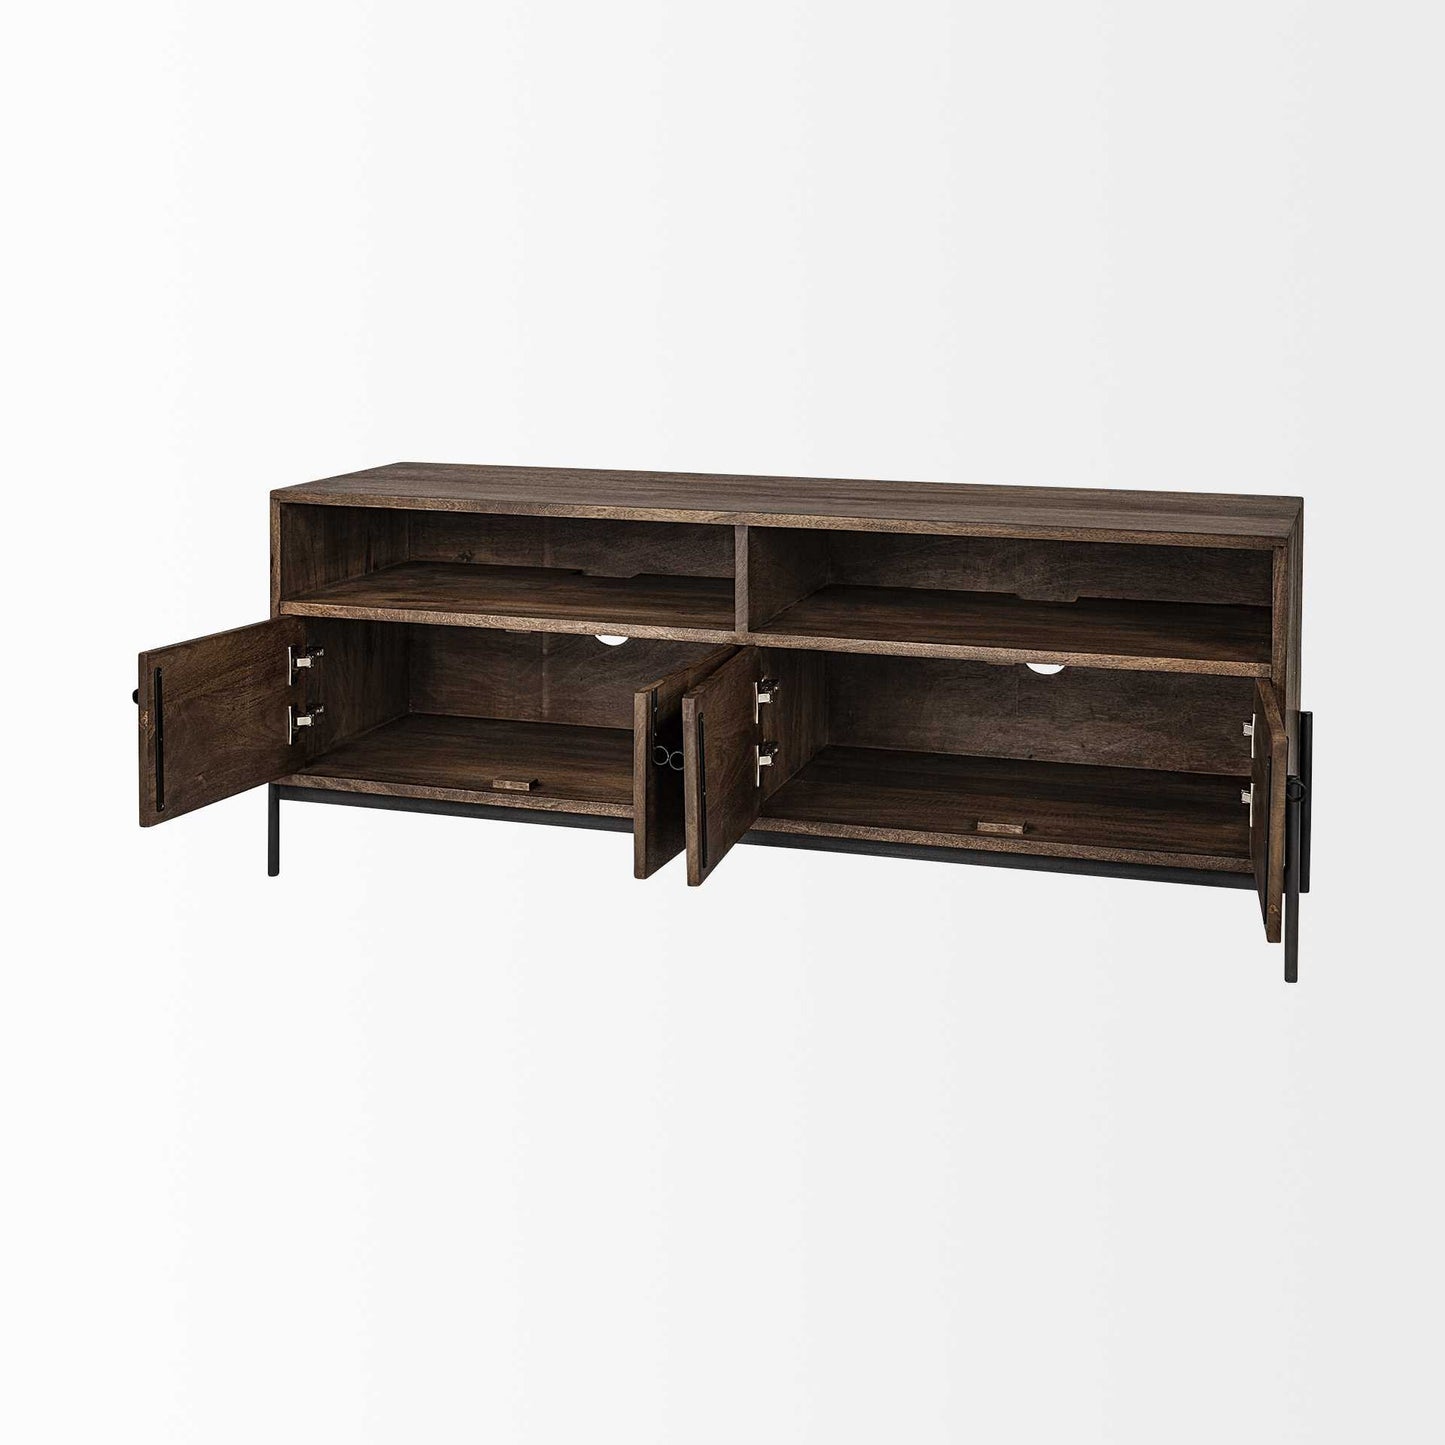 Medium Brown Mango Wood Finish TV Stand Media Console With 4 Doors And 2 Open Shelves By Homeroots